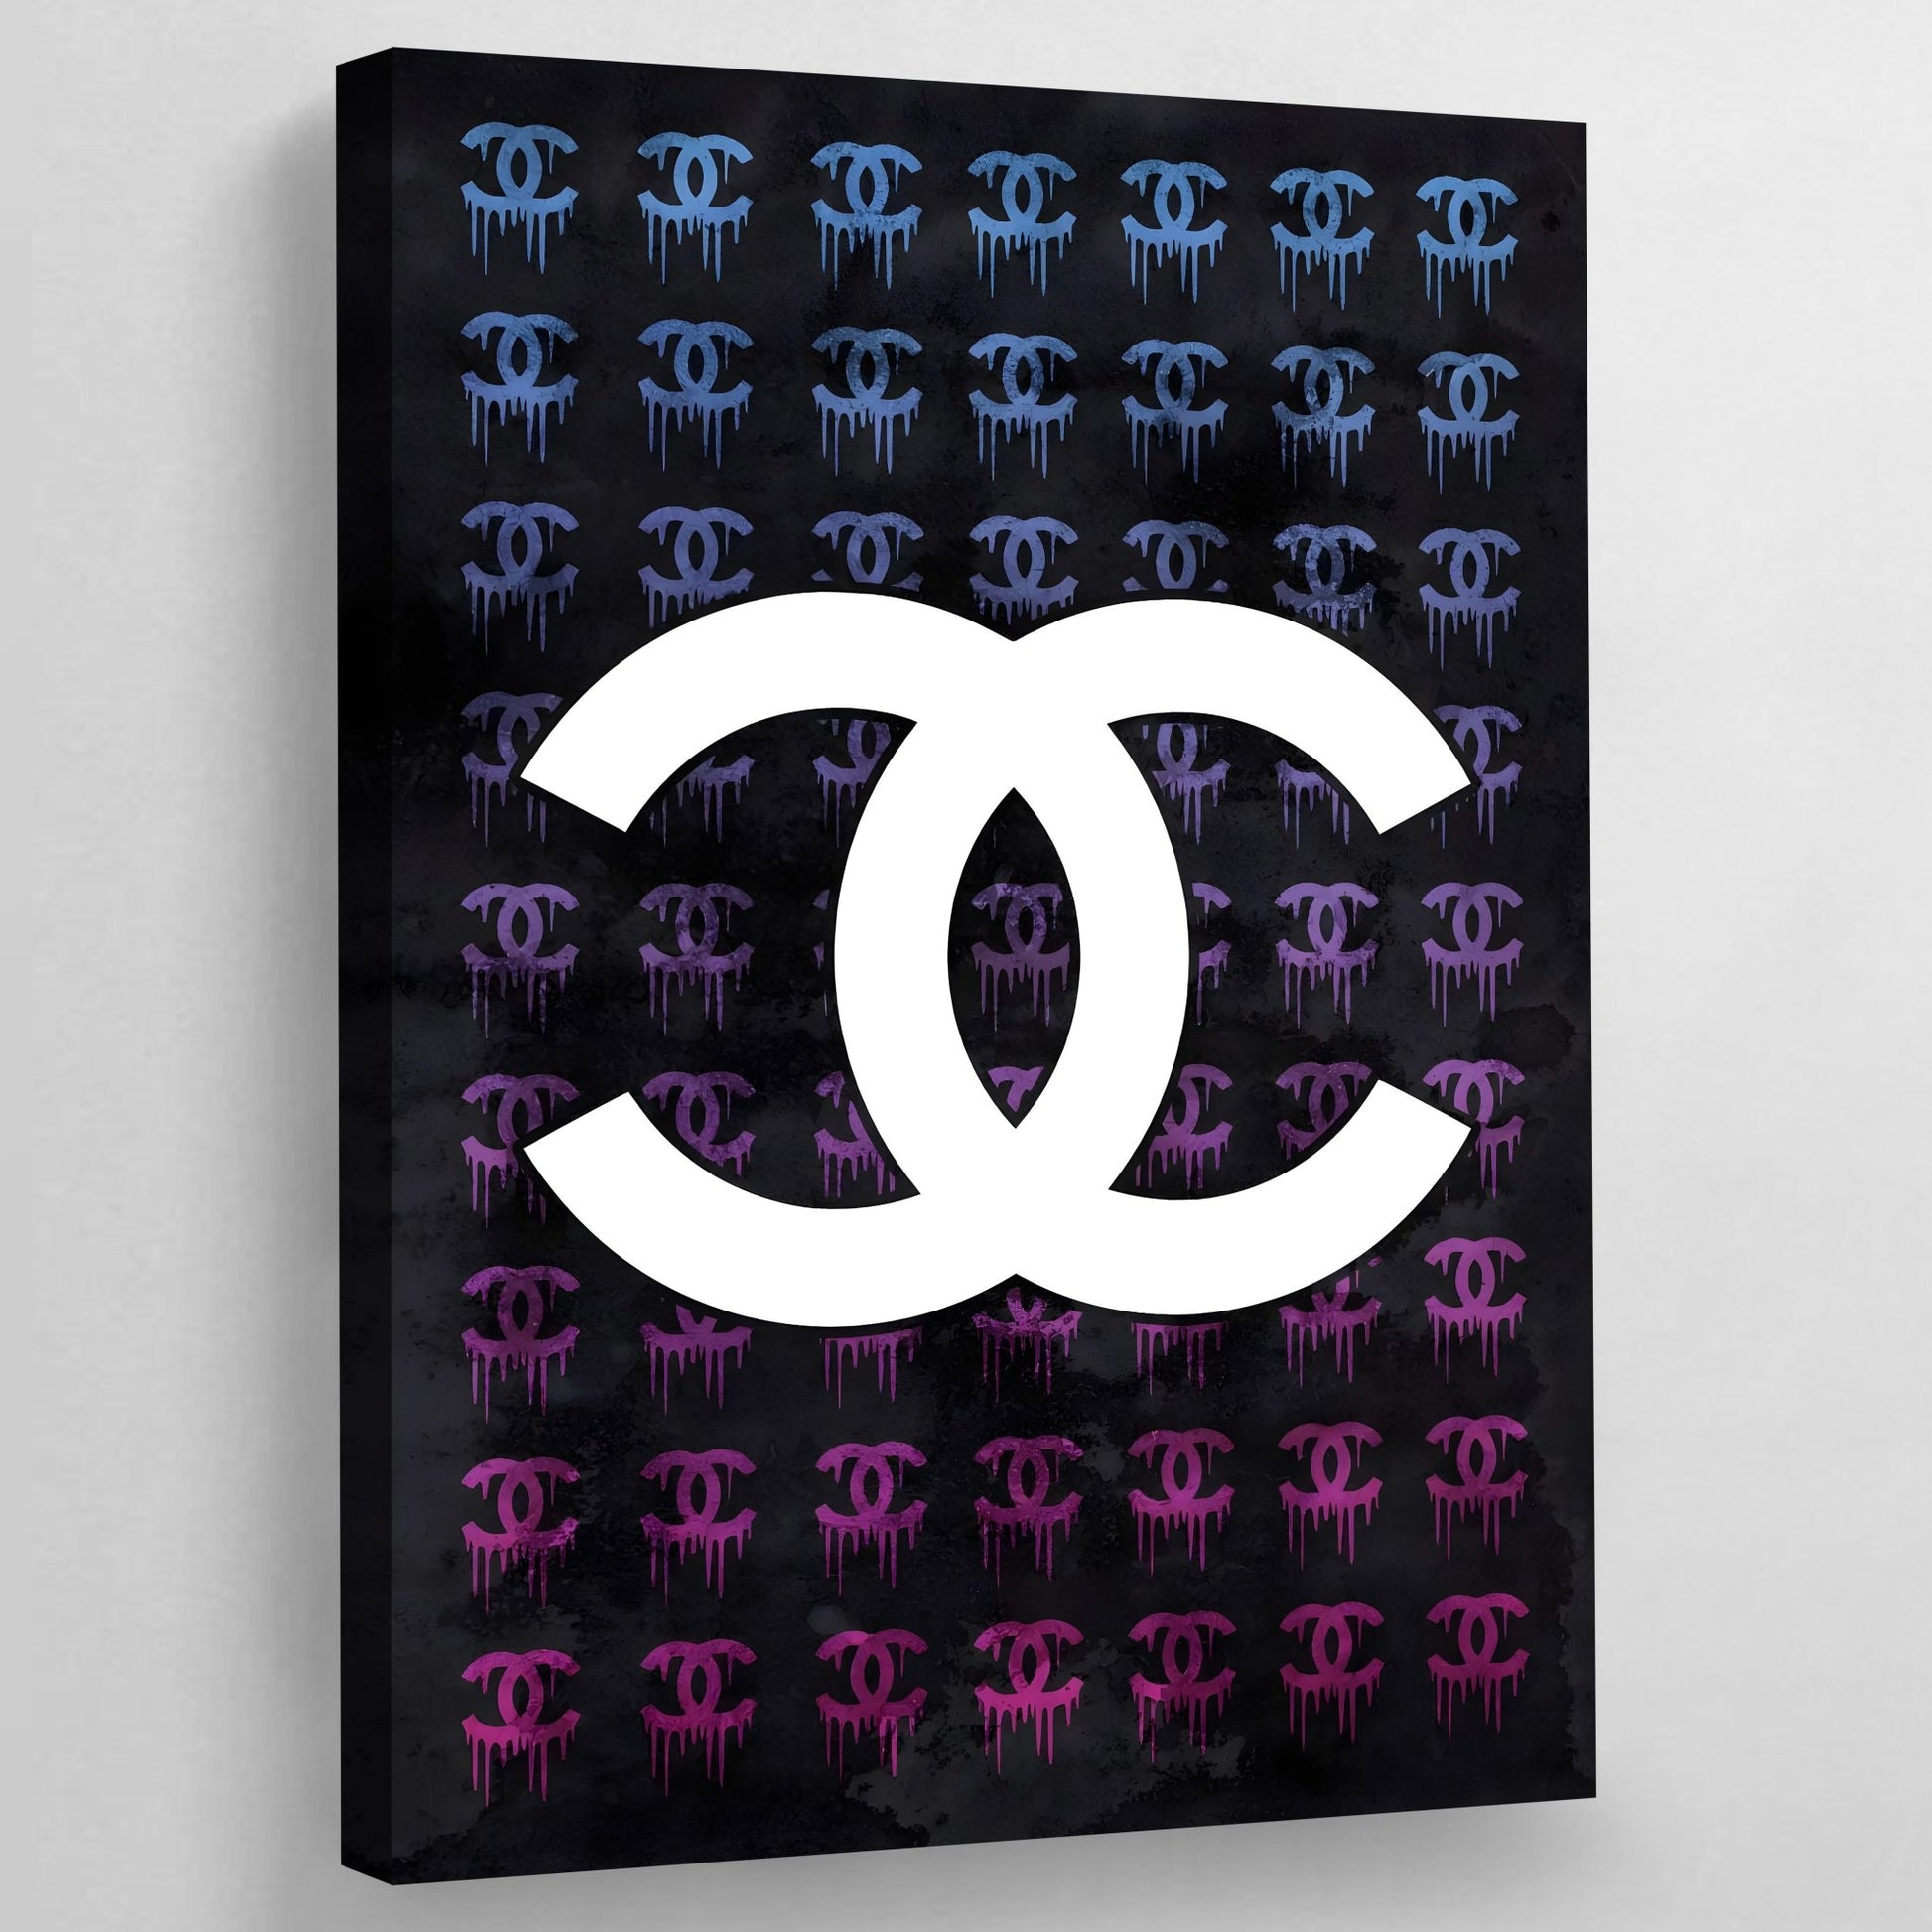 Black and Gold Chanel Wall Art